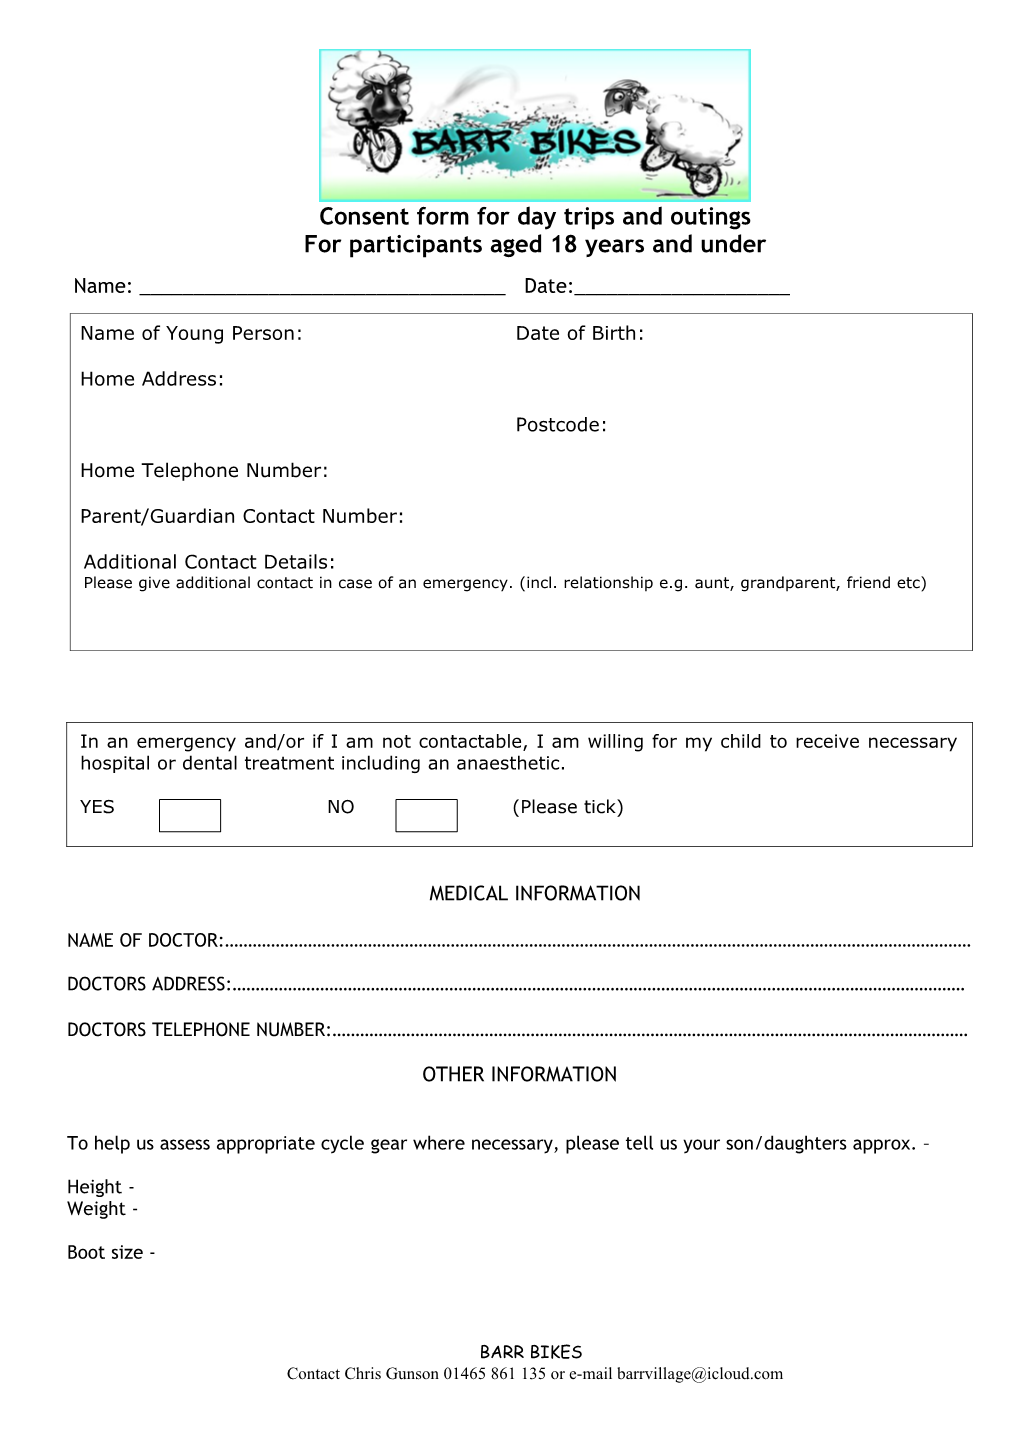 Consent Form for Day Trips and Outings